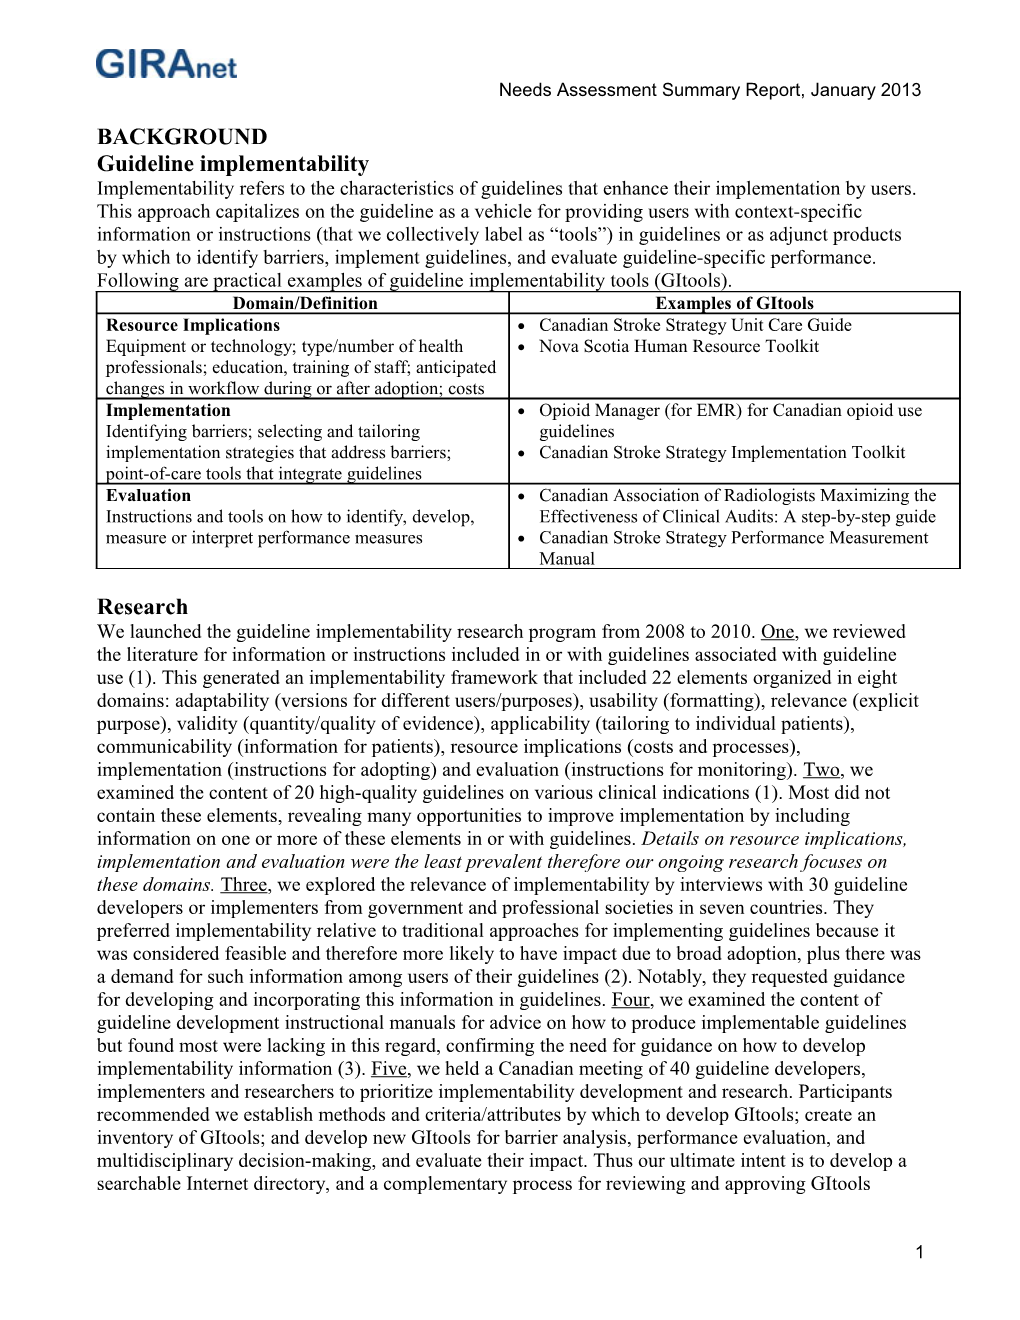 Guideline Implementability Research and Application Network